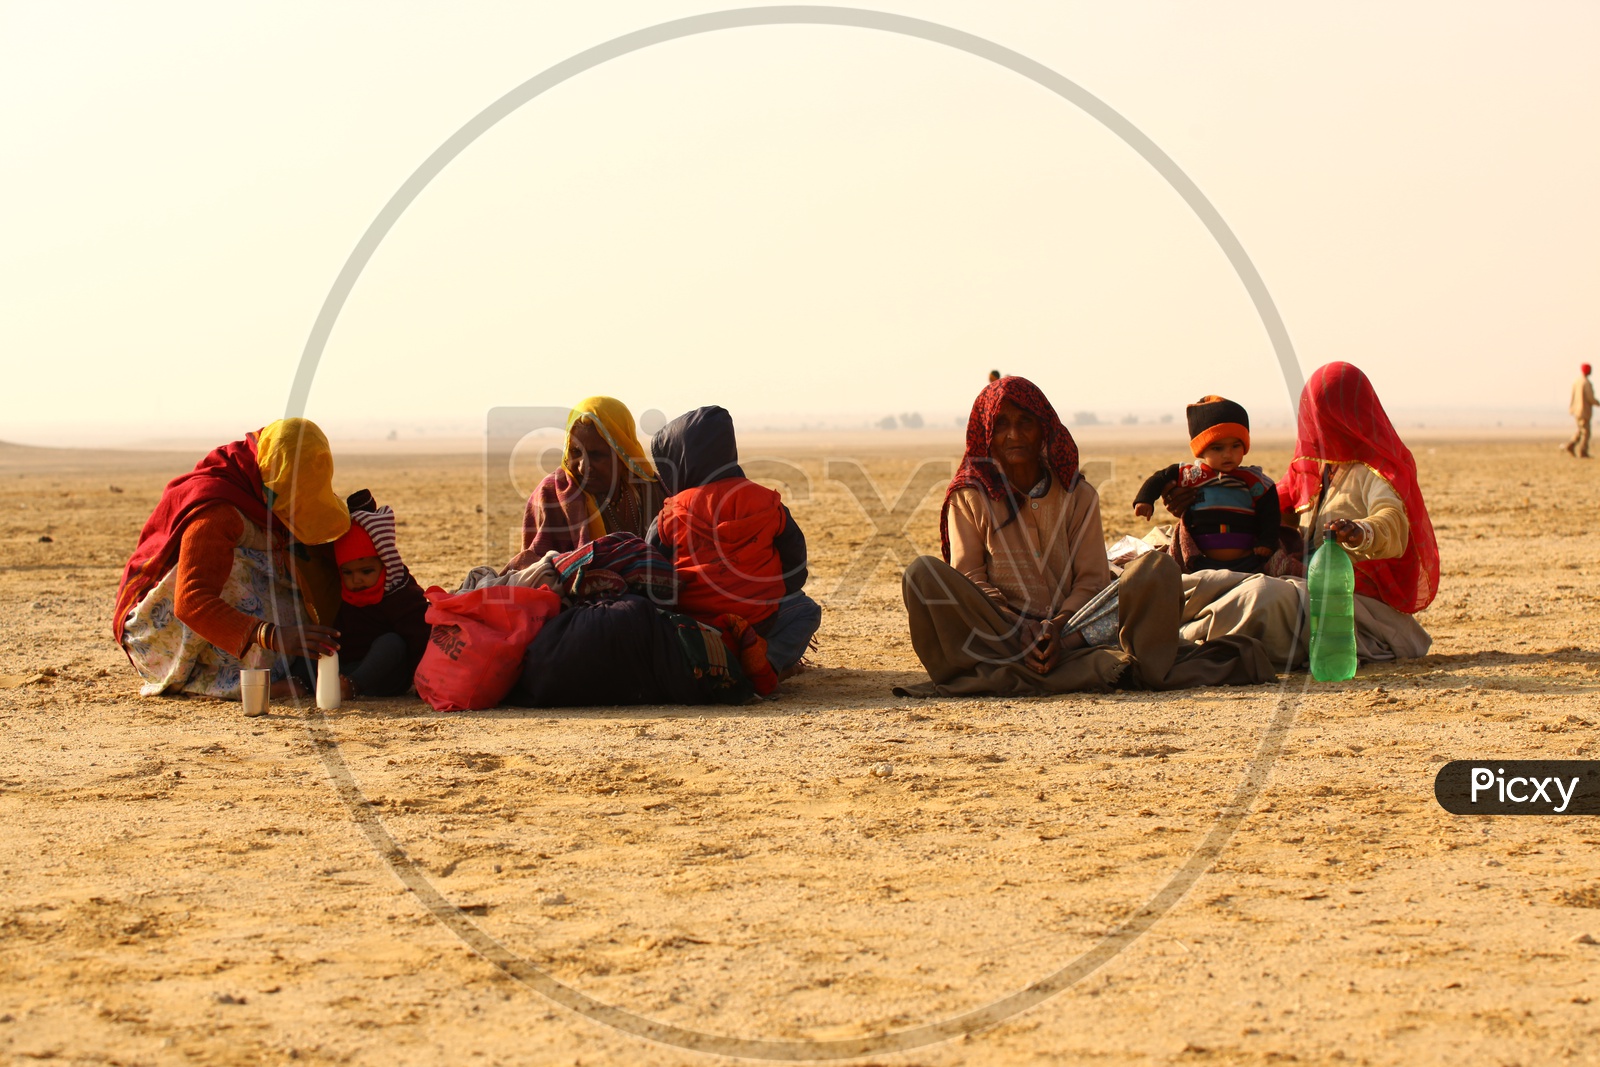 People seated in the desert